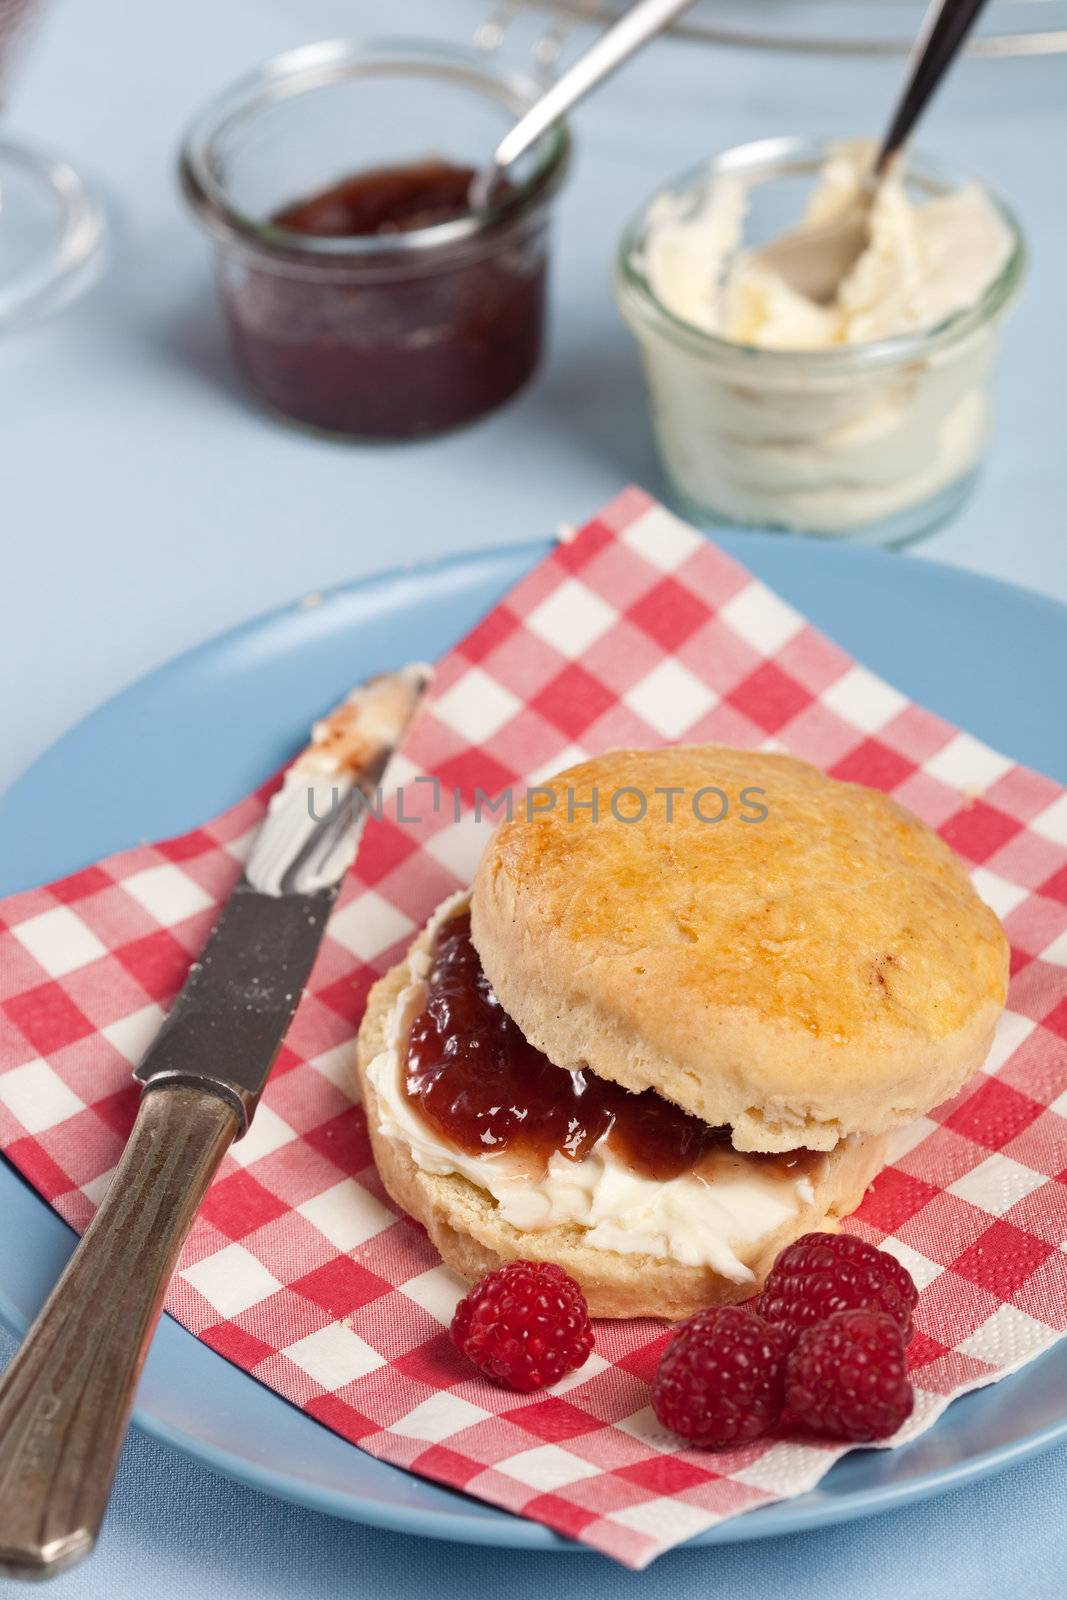 Freshly baked scone with raspberry jam and clotted cream